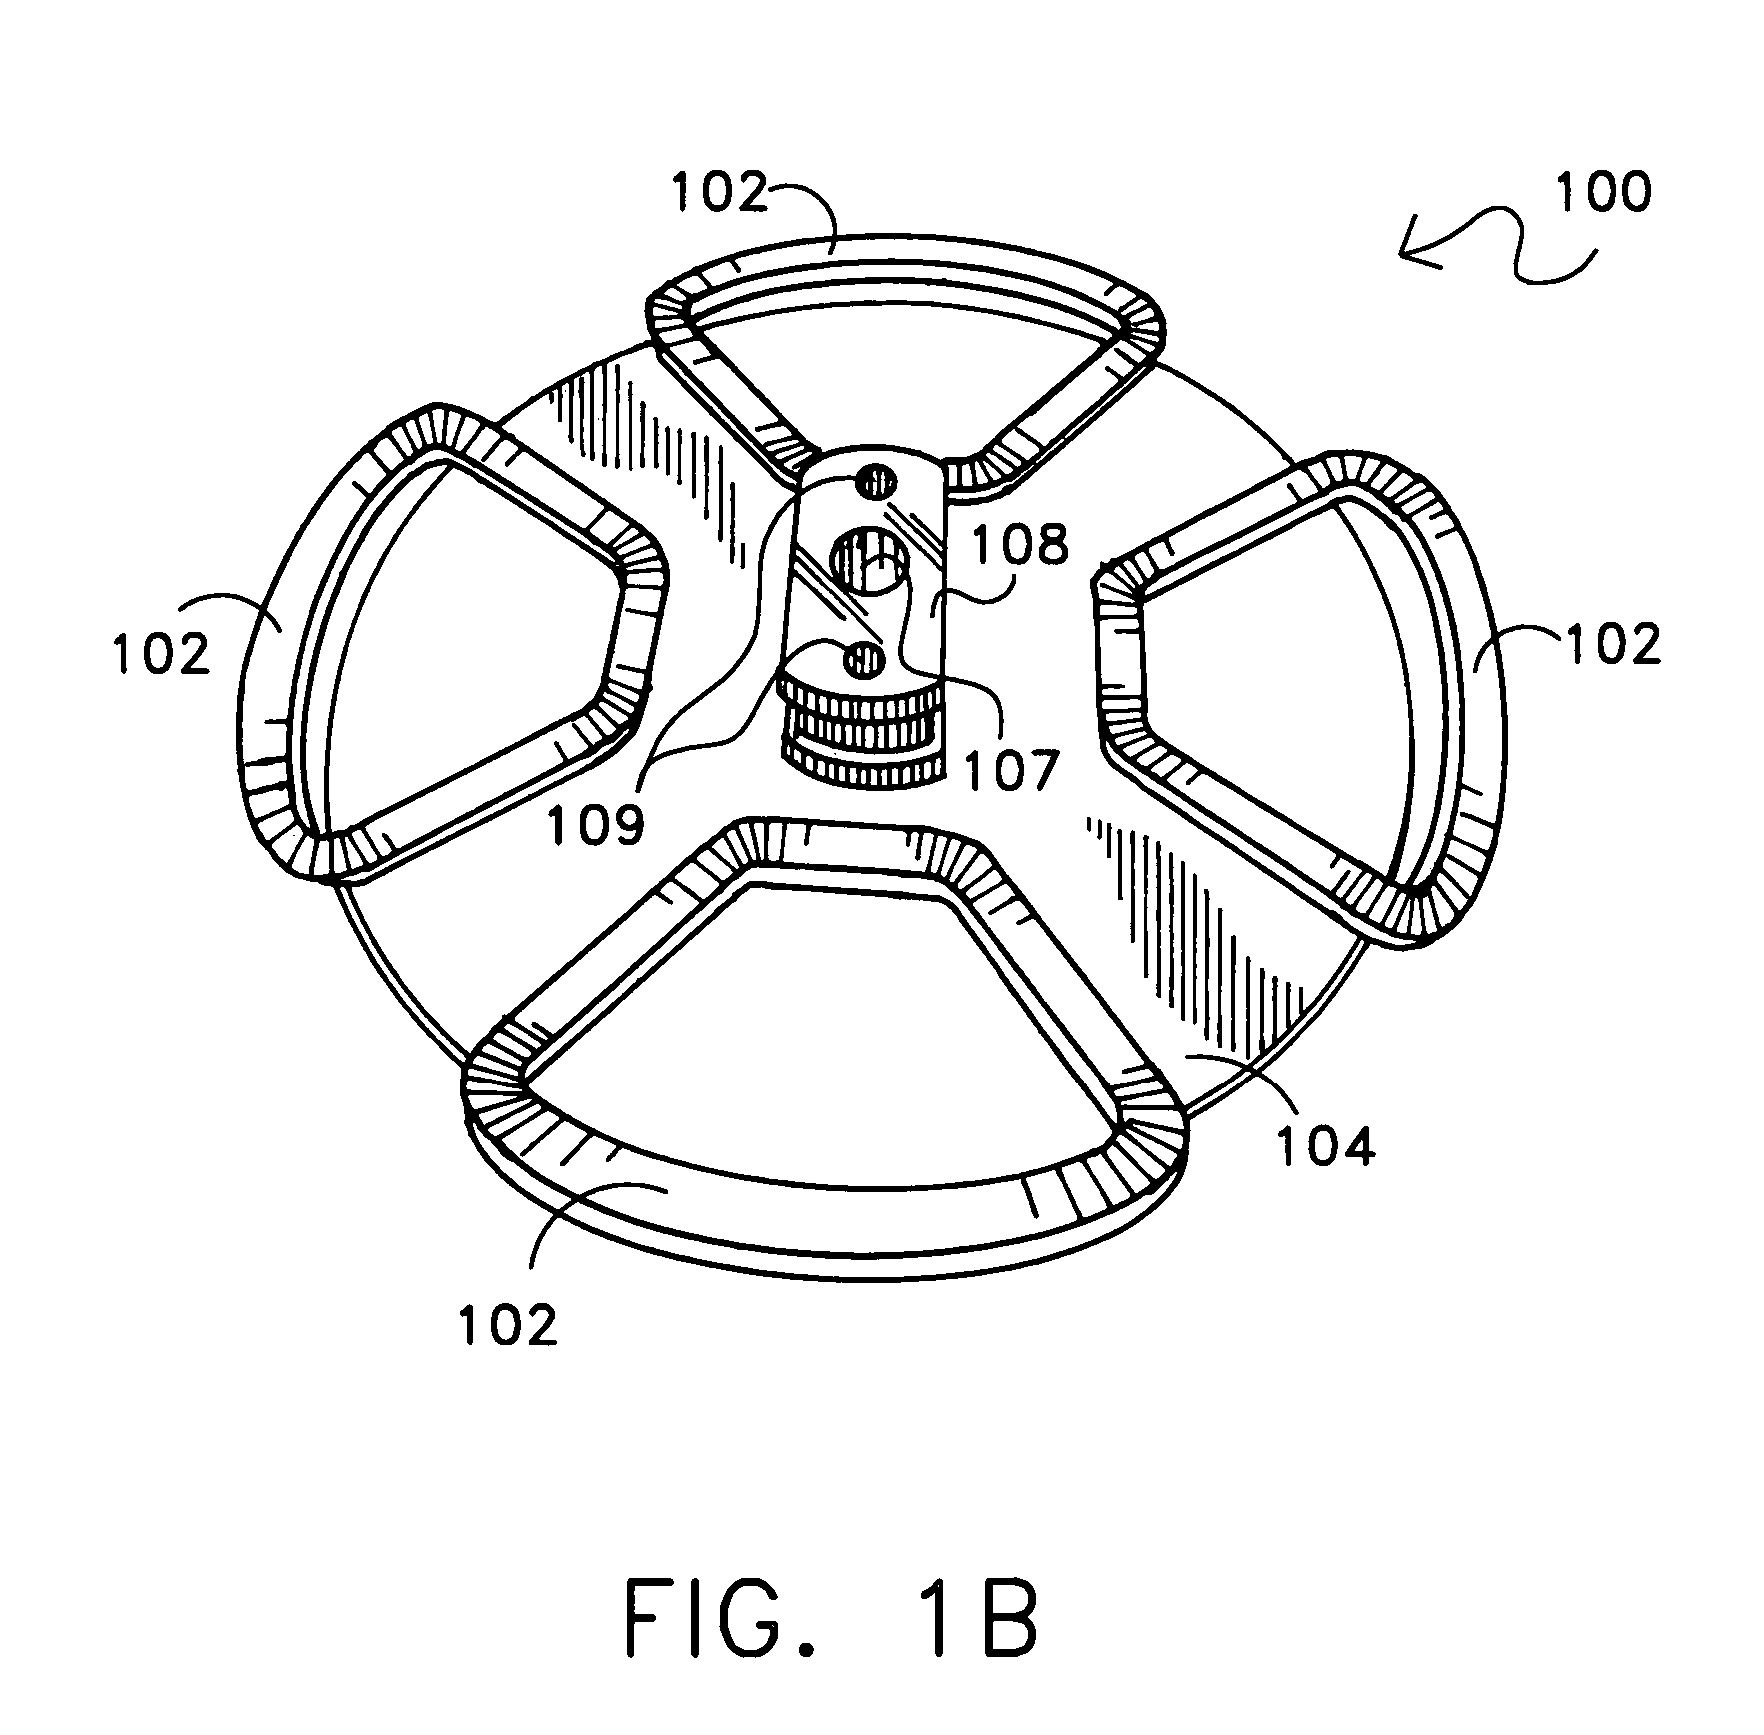 Electromagnetic circuit and servo mechanism for articulated cameras